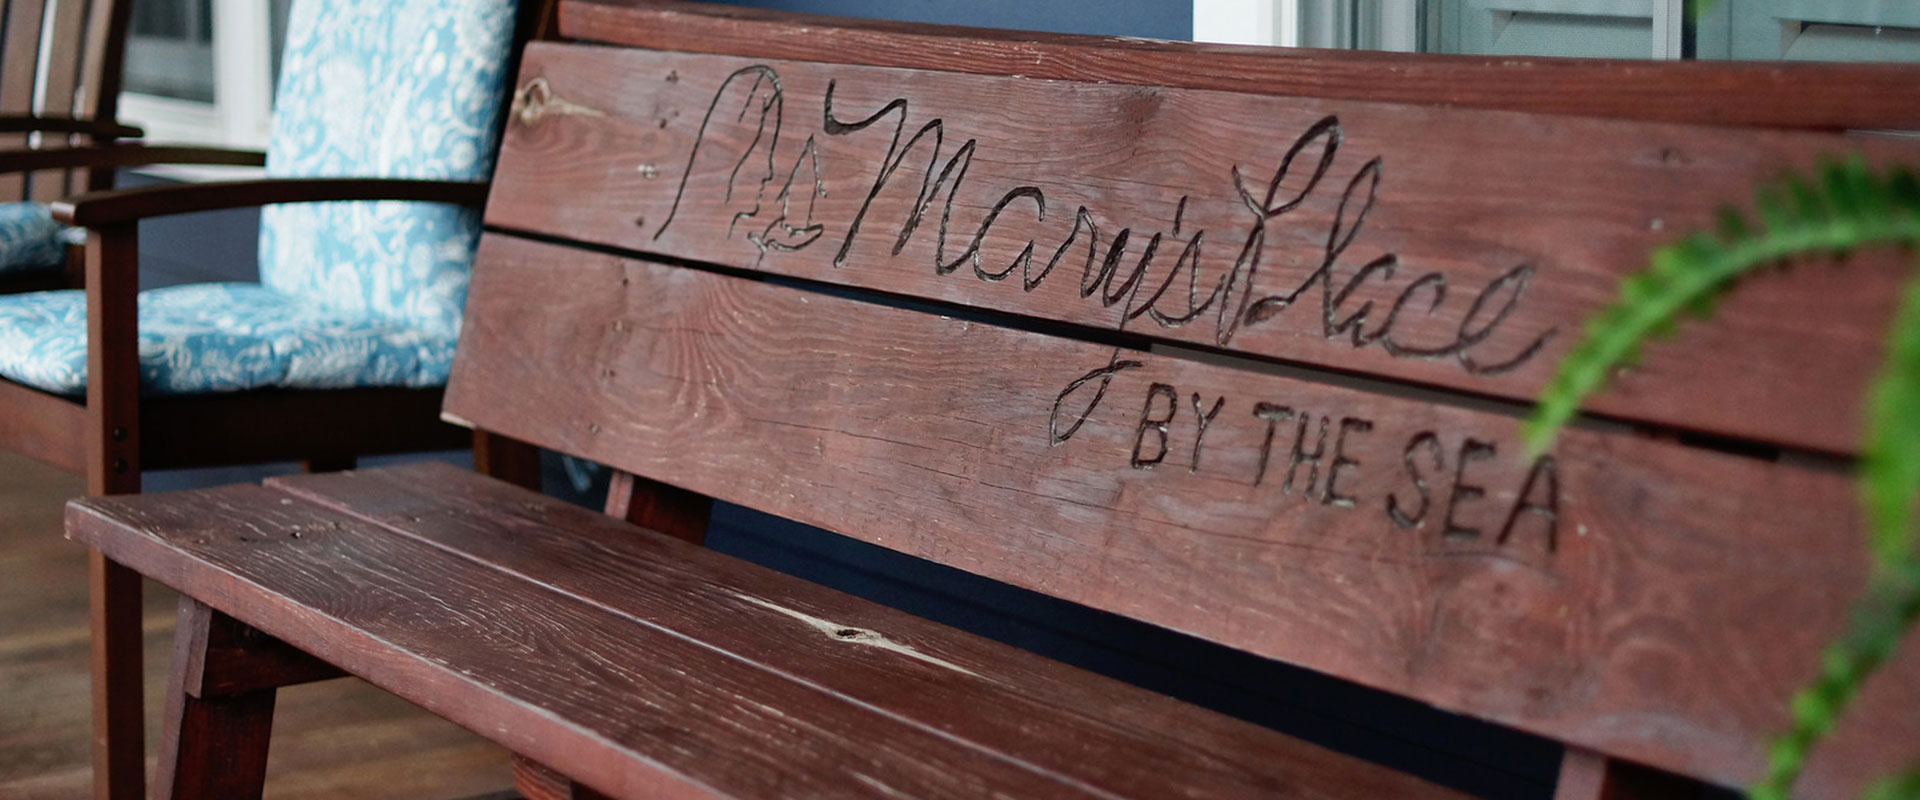 Porch bench with Mary's Place by the Sea inscribed on it